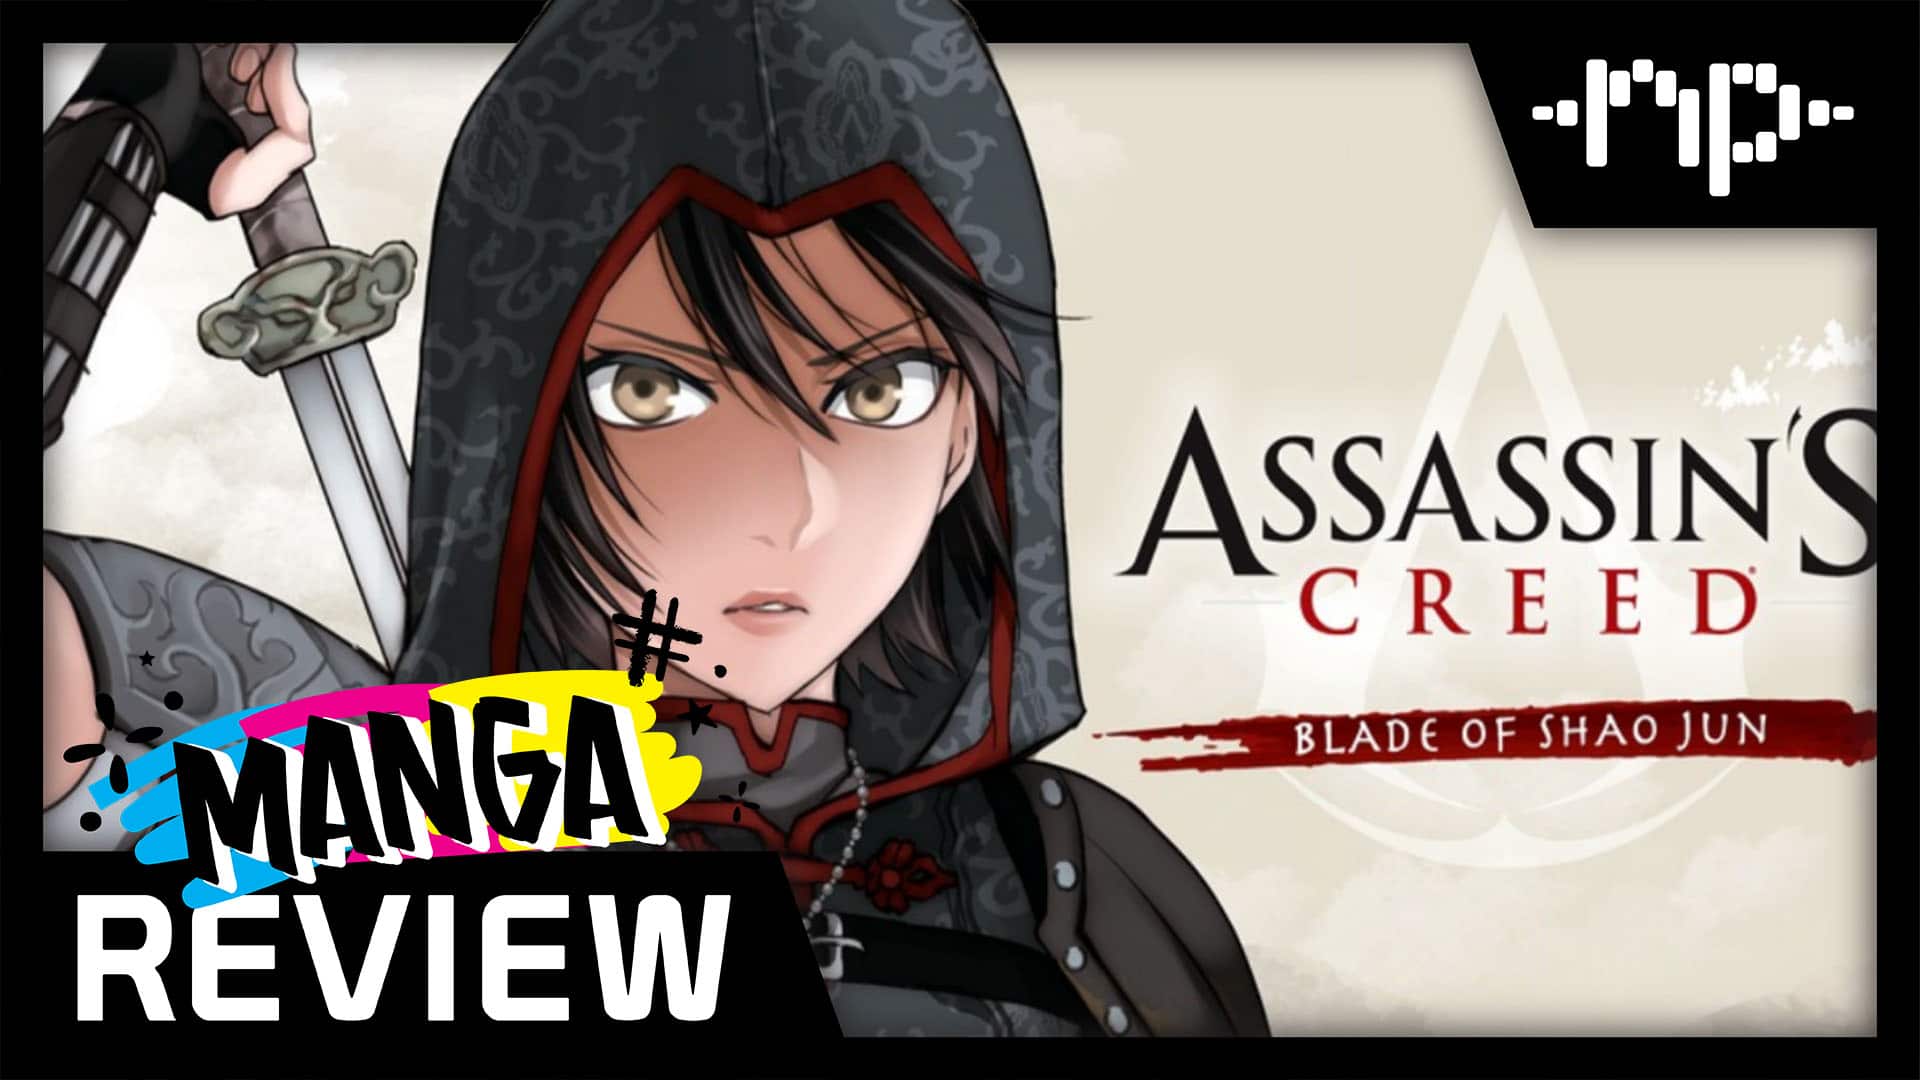 Assassin's Creed: Blade Of Shao Jun Vol. 1 Review